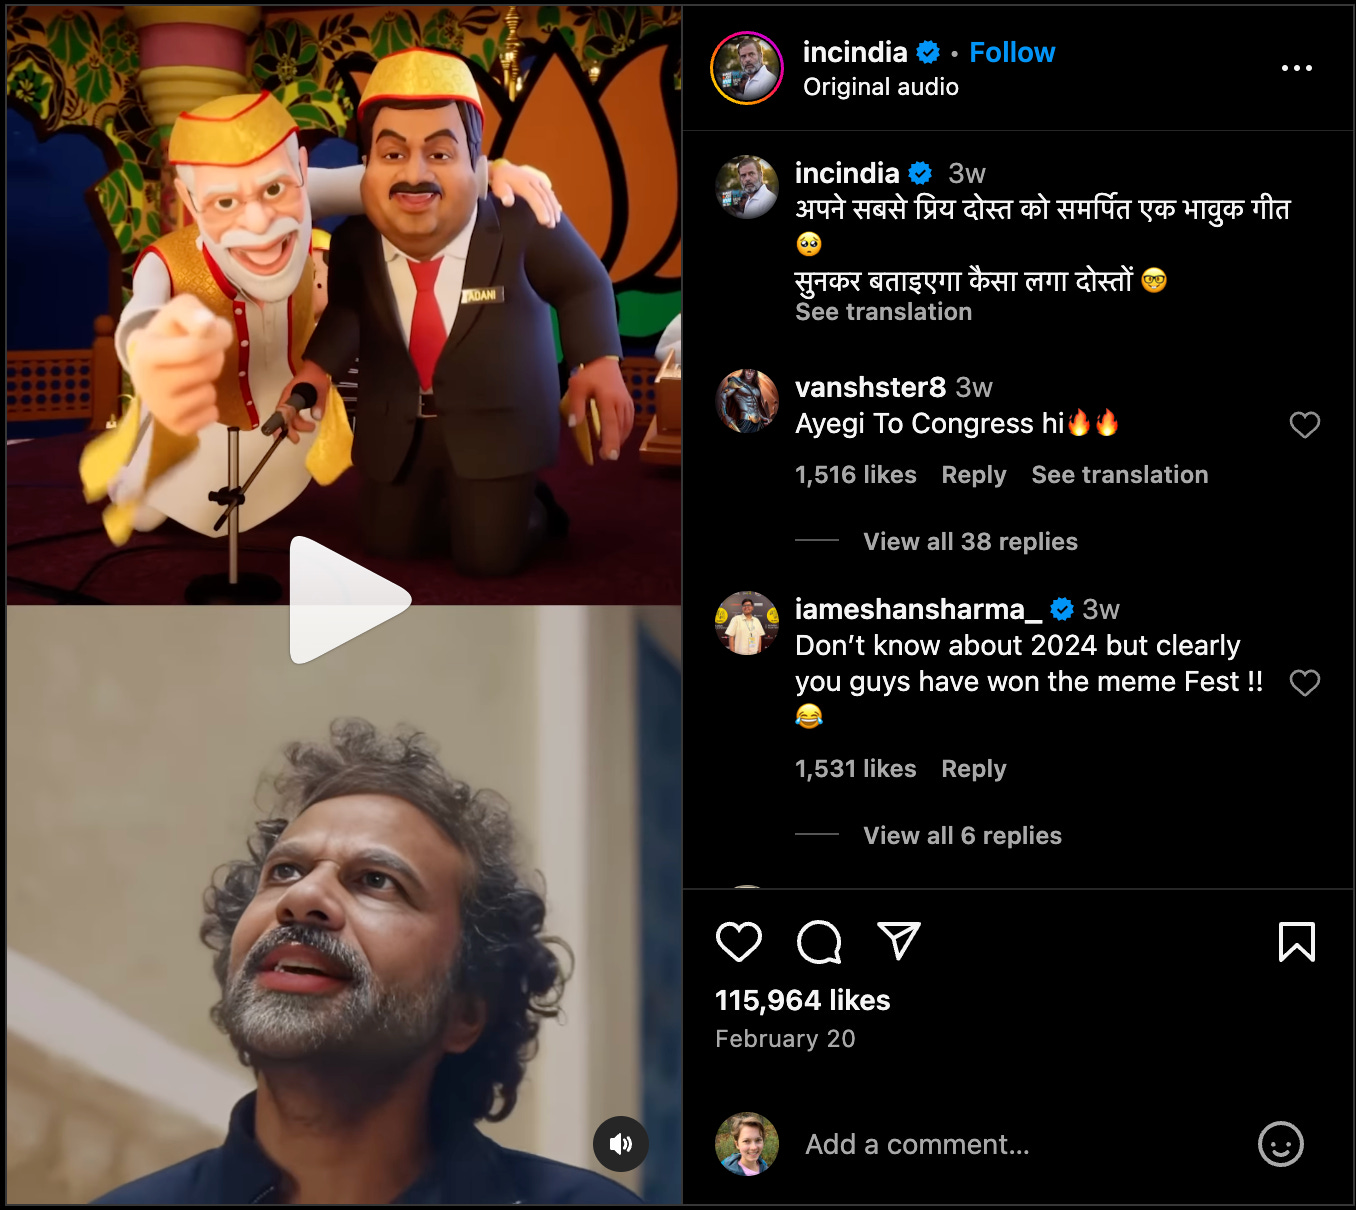 A screenshot from an Instagram account featuring a video. The top half features AI-generated cartoons of two Indian politicians. The bottom features a real (maybe) politician singing.